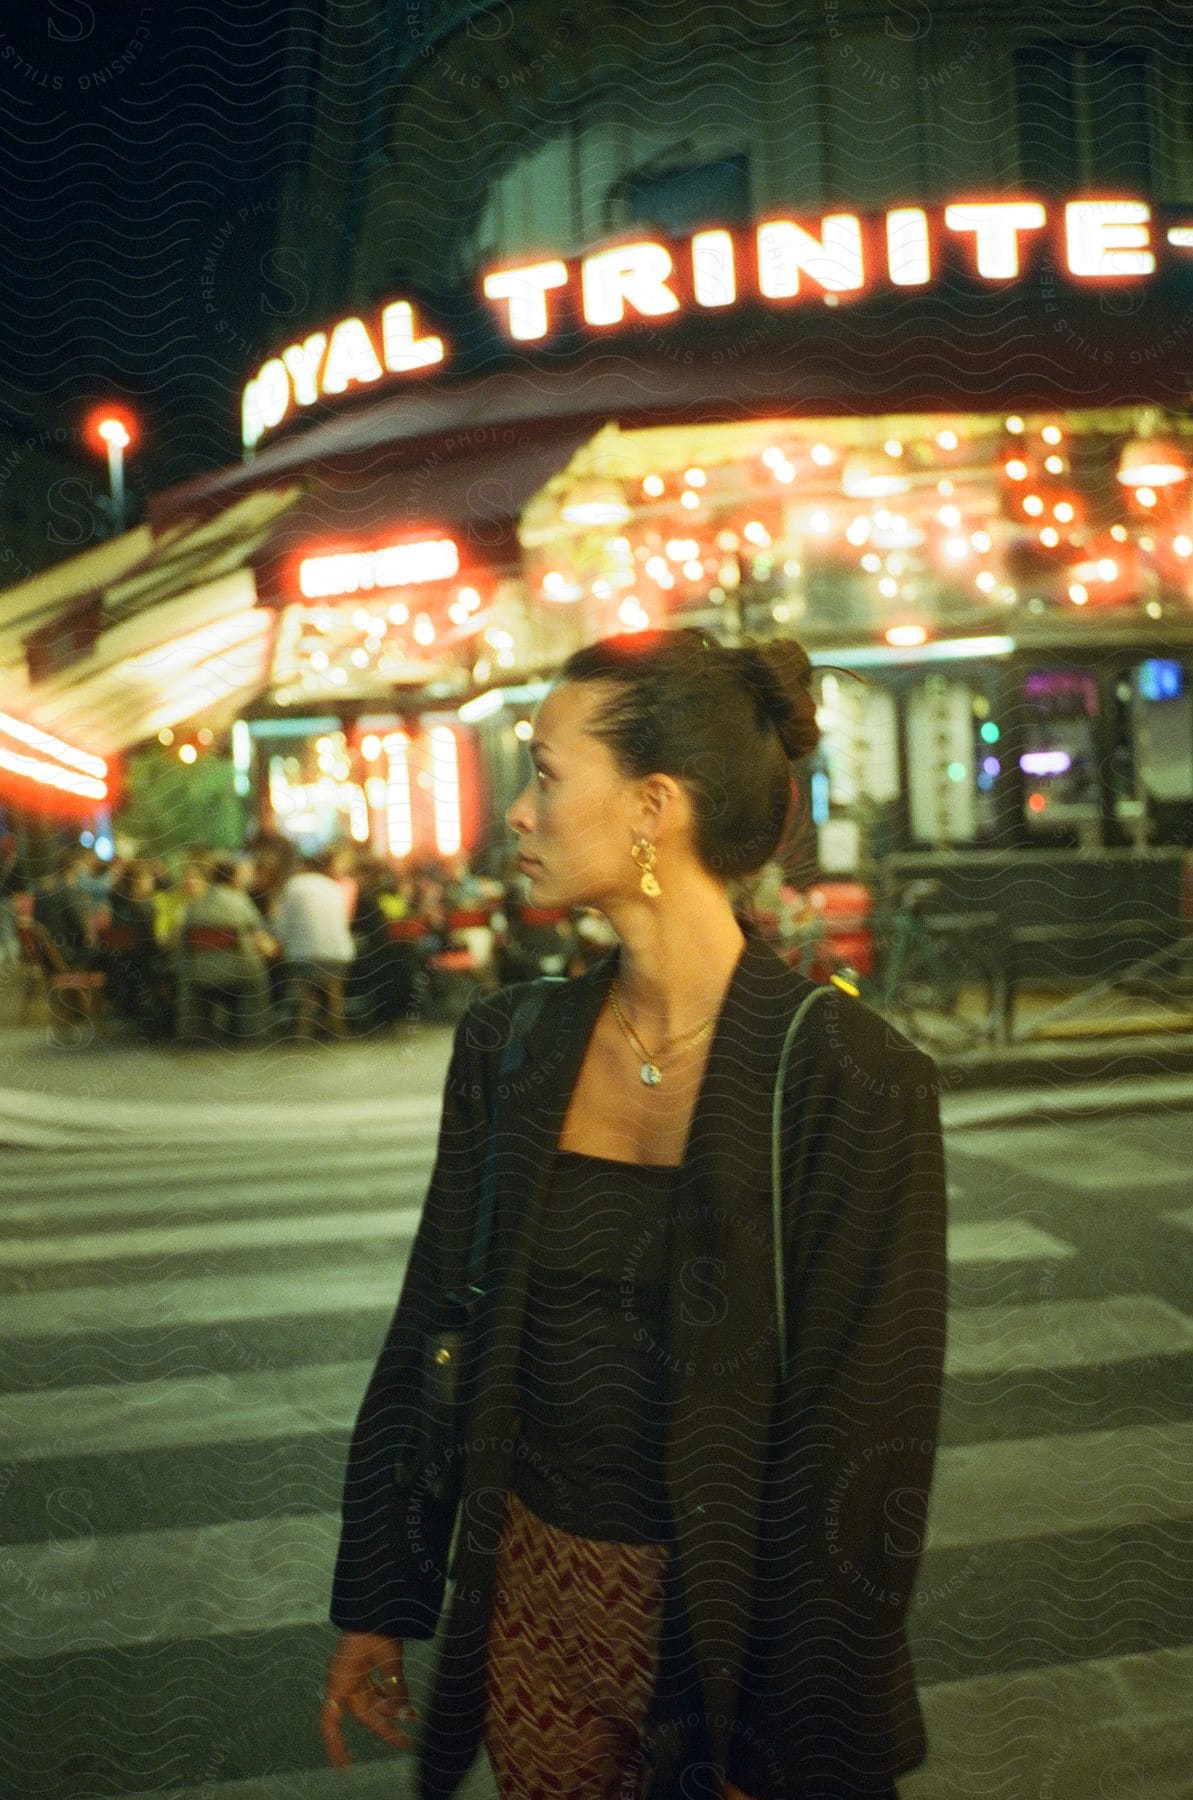 A woman crossing the street at night in paris